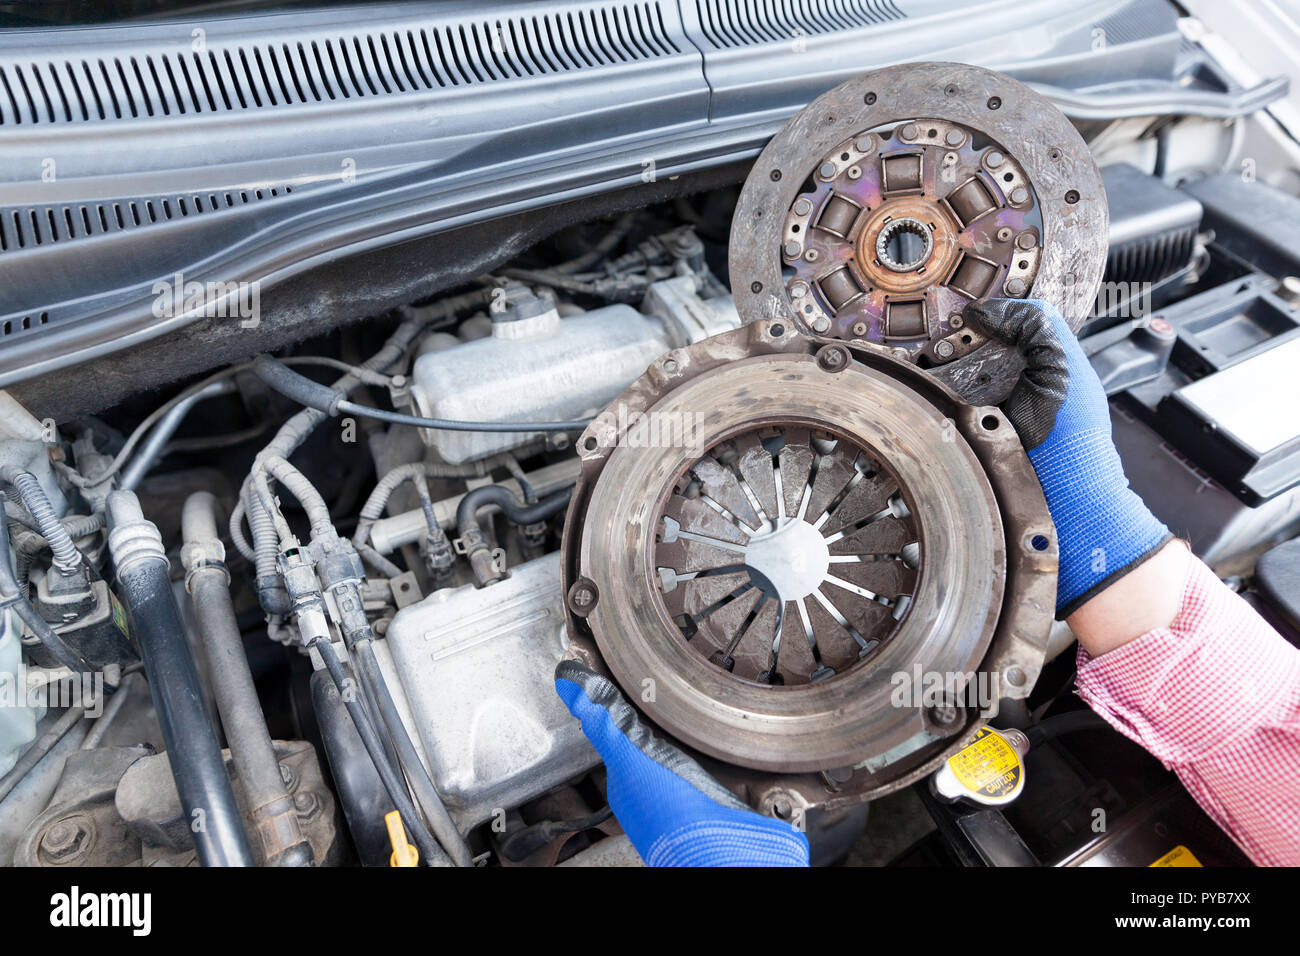 Auto mechanic wearing protective work gloves holding an old clutch basket and engine plate over the car engine Stock Photo